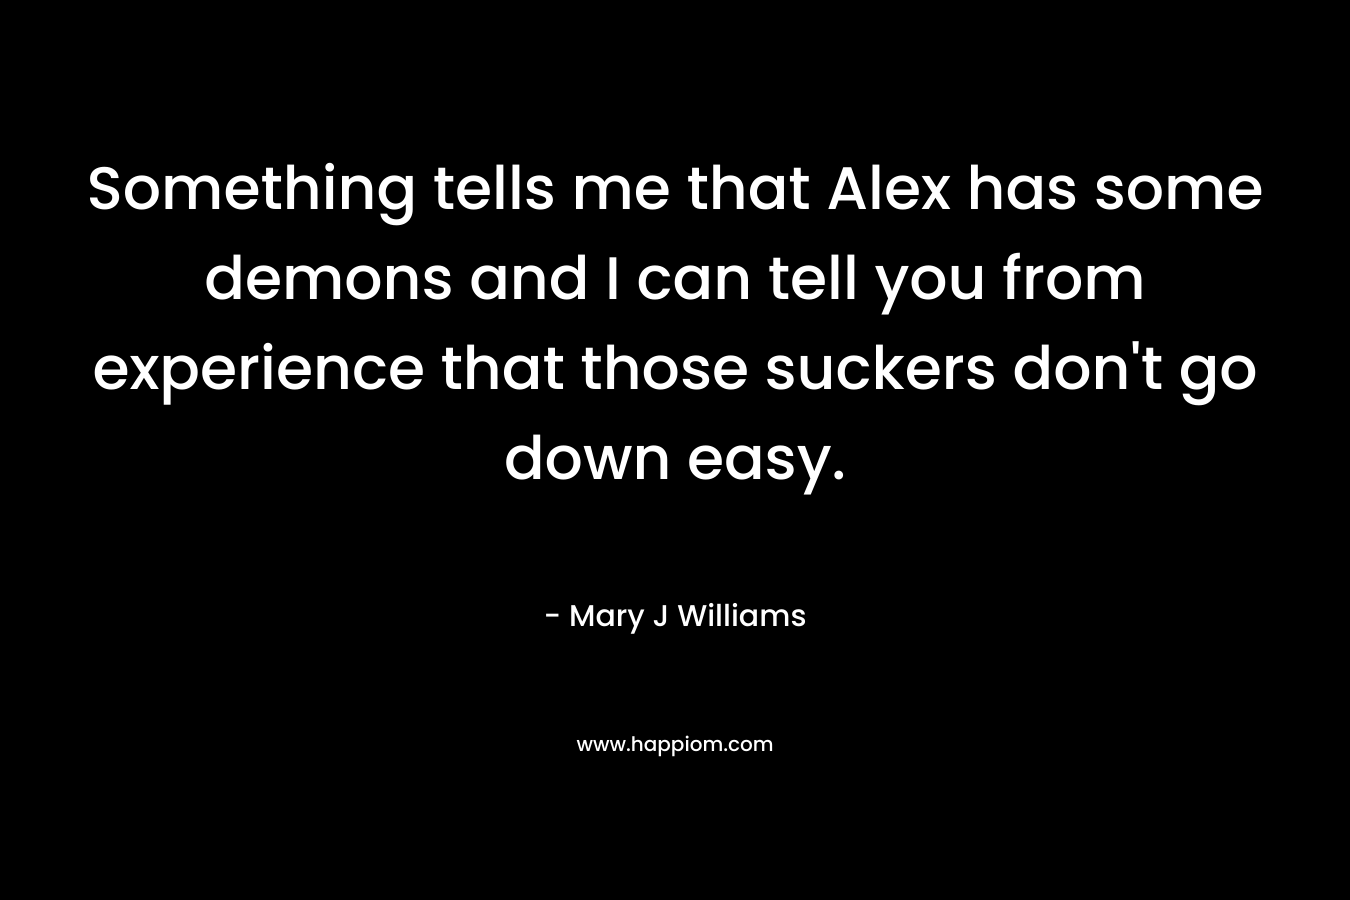 Something tells me that Alex has some demons and I can tell you from experience that those suckers don't go down easy.